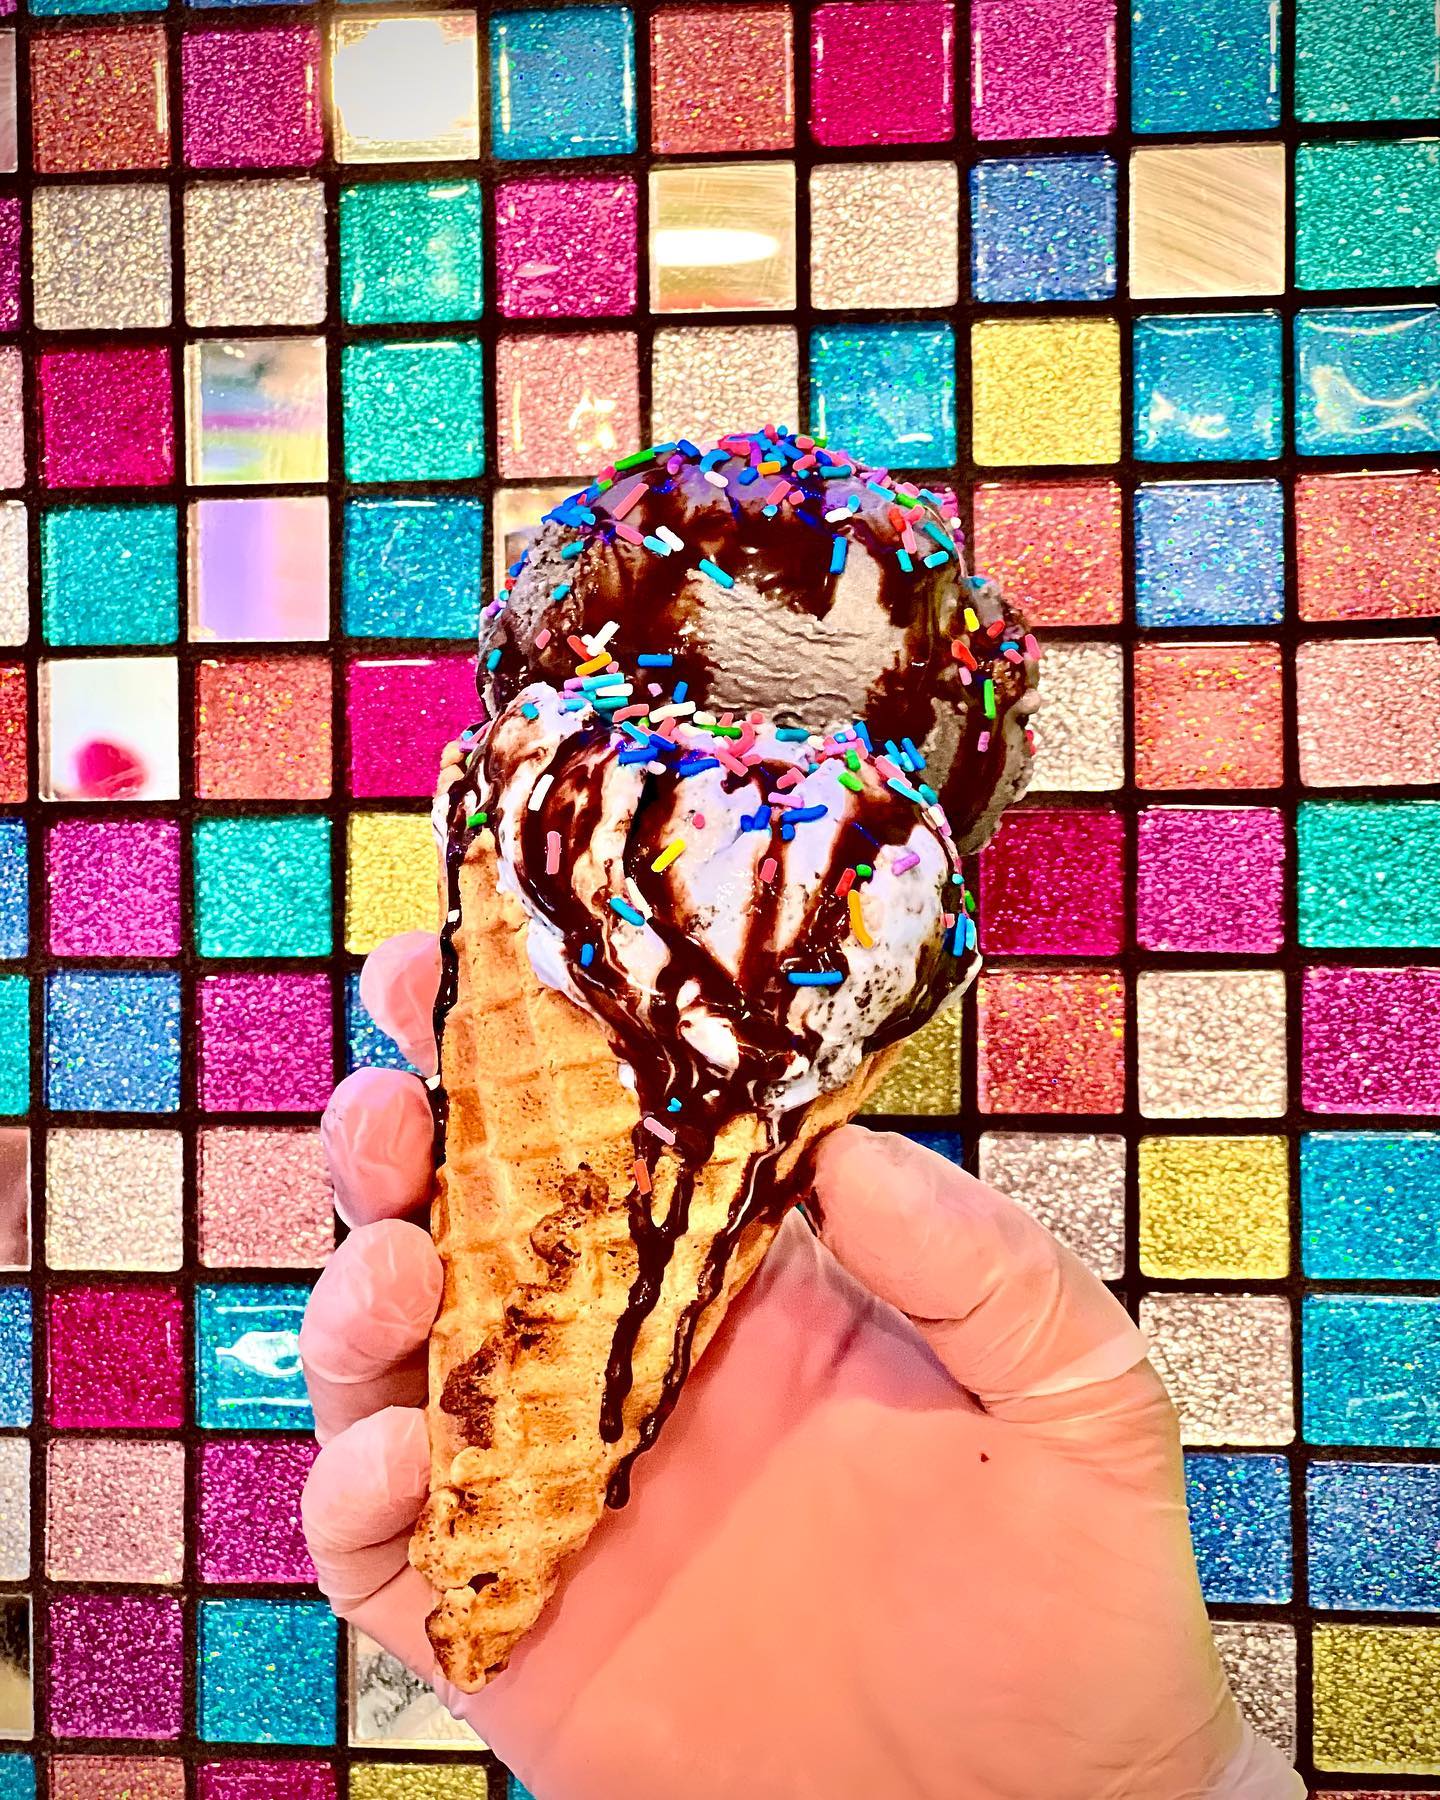 Someone holding up a waffle ice cream cone with chocolate sauce and sprinkles in front of a colorful tiled background.